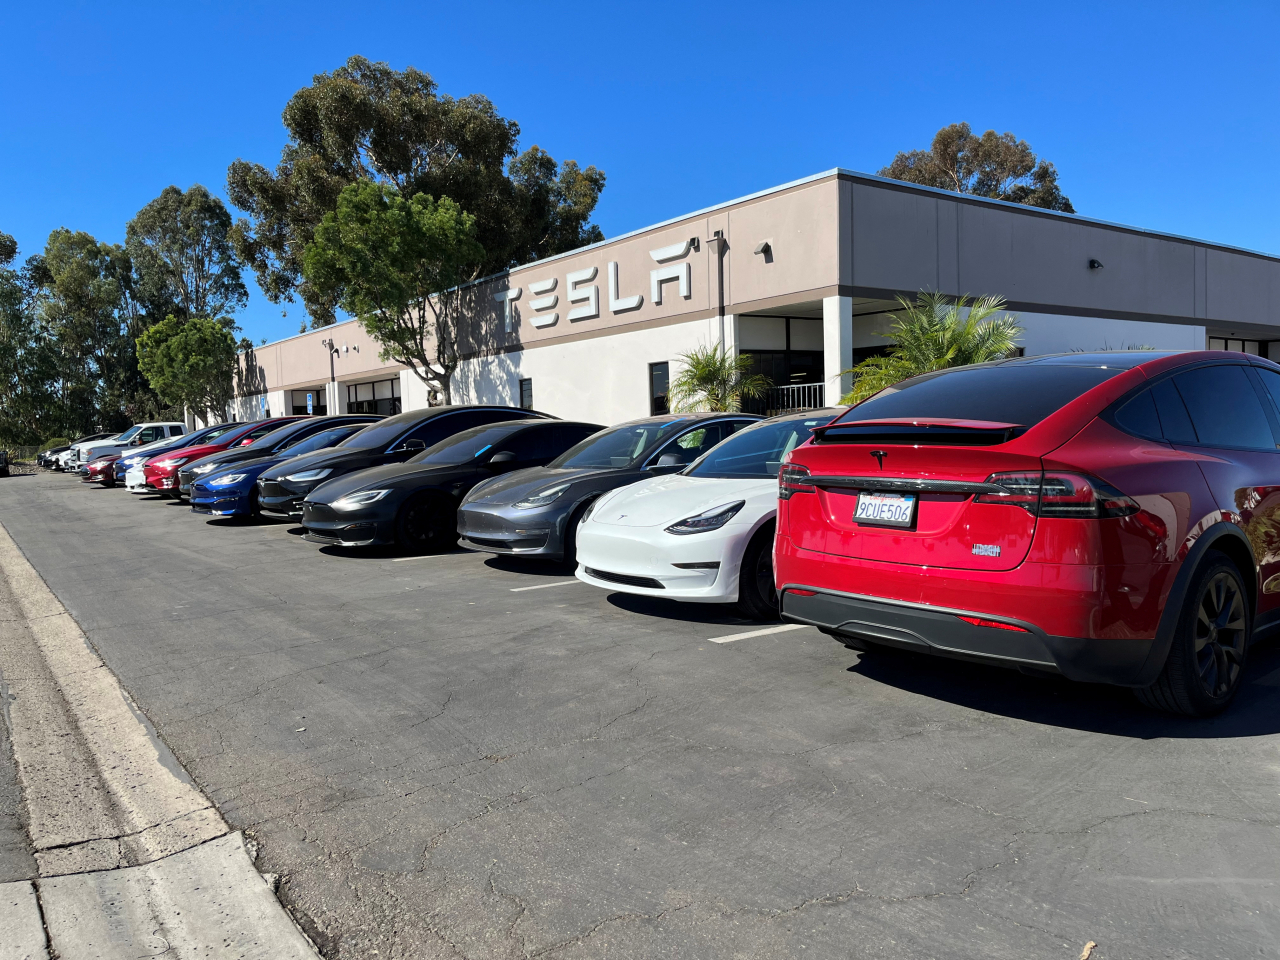 Tesla electric vehicles are parked in front of a Tesla service center in the Kearny Mesa region of San Diego in this undated photo. (Reuters)